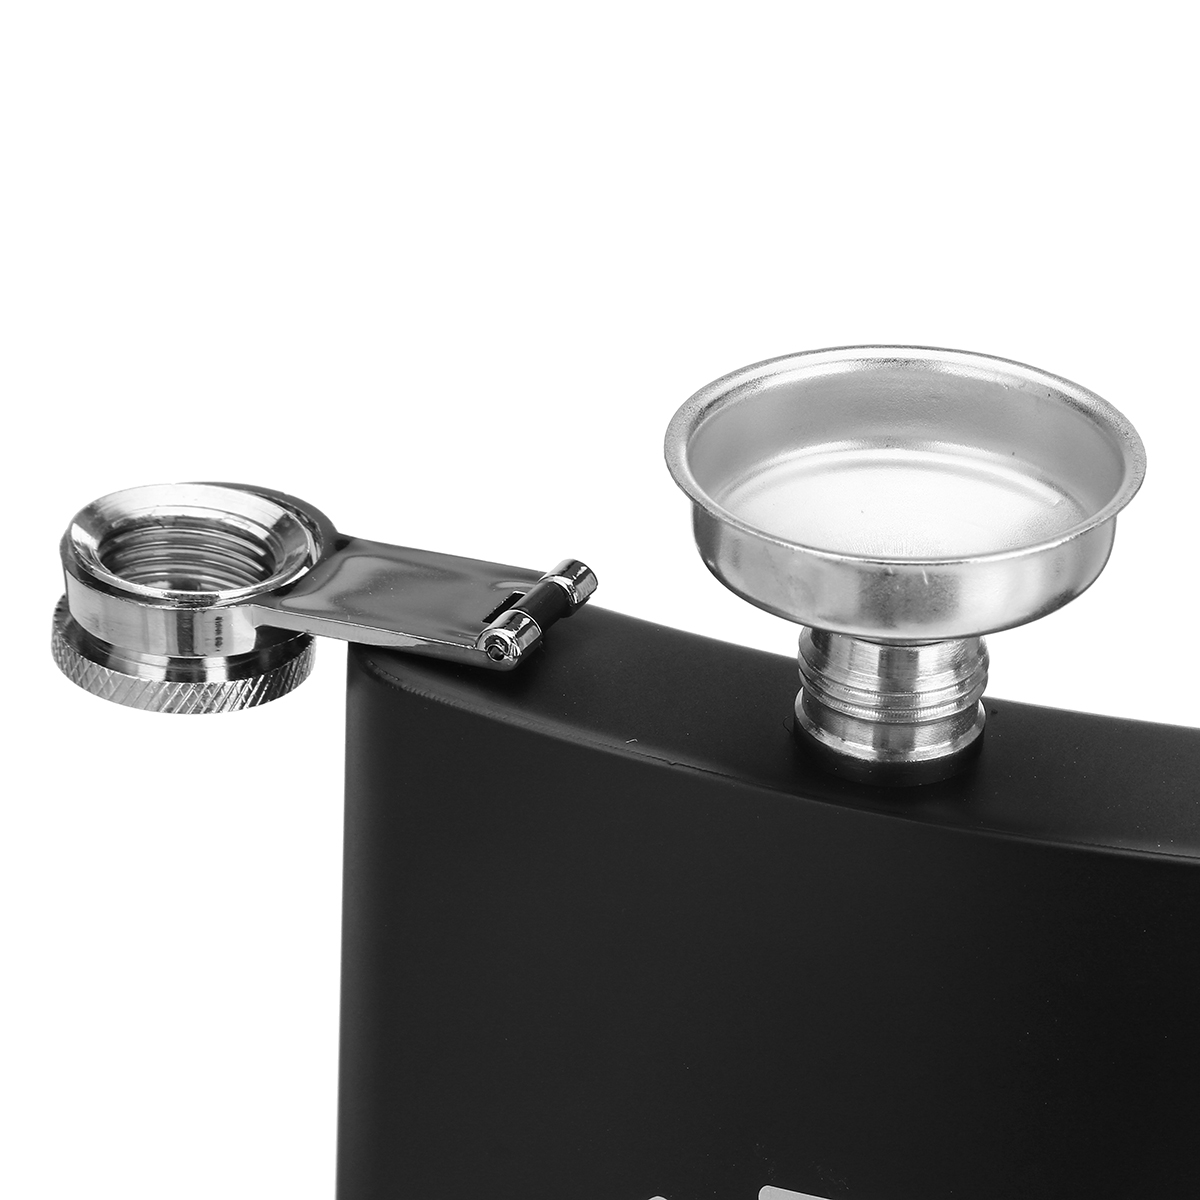 8oz-Stainless-Steel-Pocket-Liquor-Hip-Flask-Drink-Flagon-with-Funnel-1582092-6